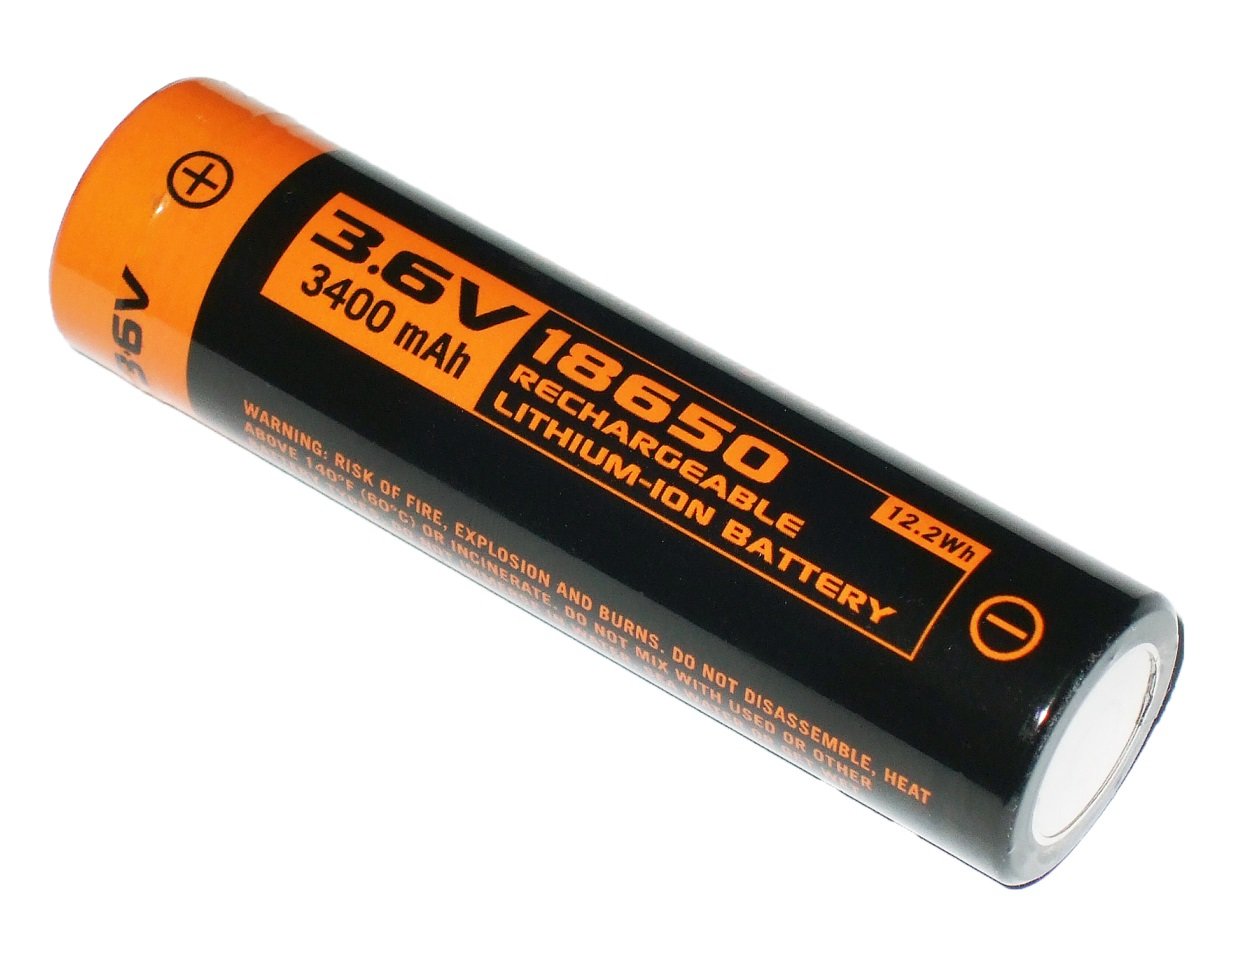 New Manker 18650 3400mAh 3.6V Protected Button Top Rechargeable Battery Cell